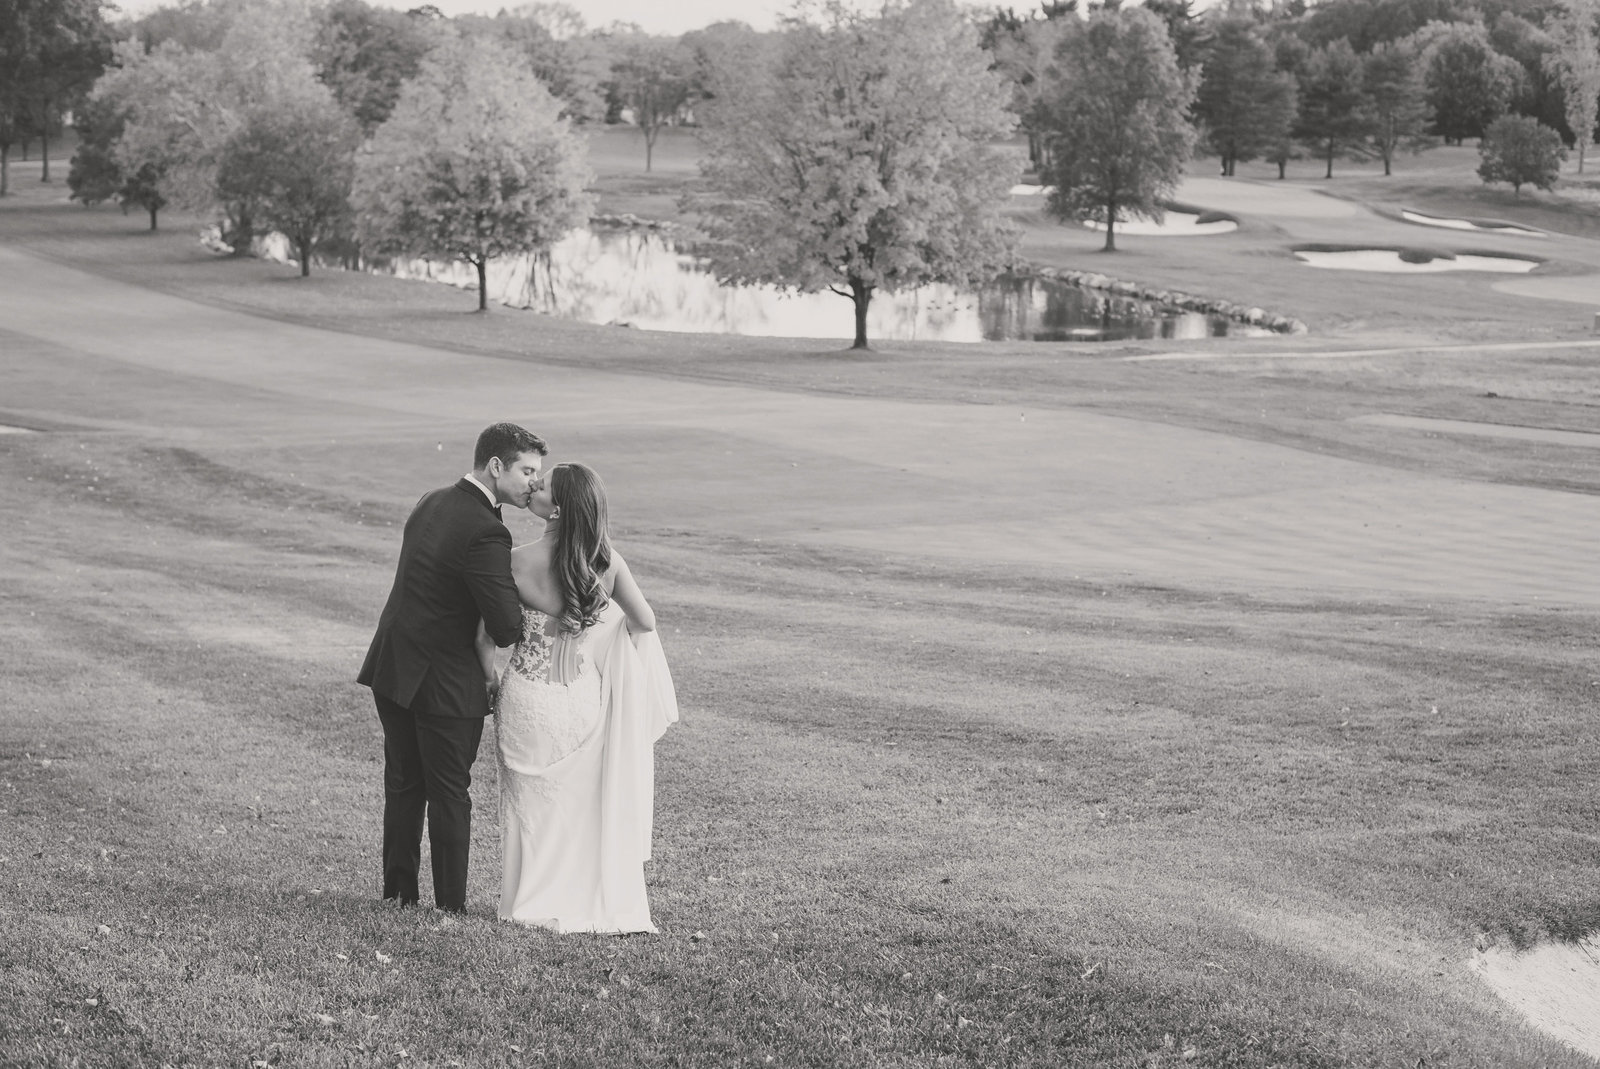 bride and groom walking the grounds at Glen Head Country Club